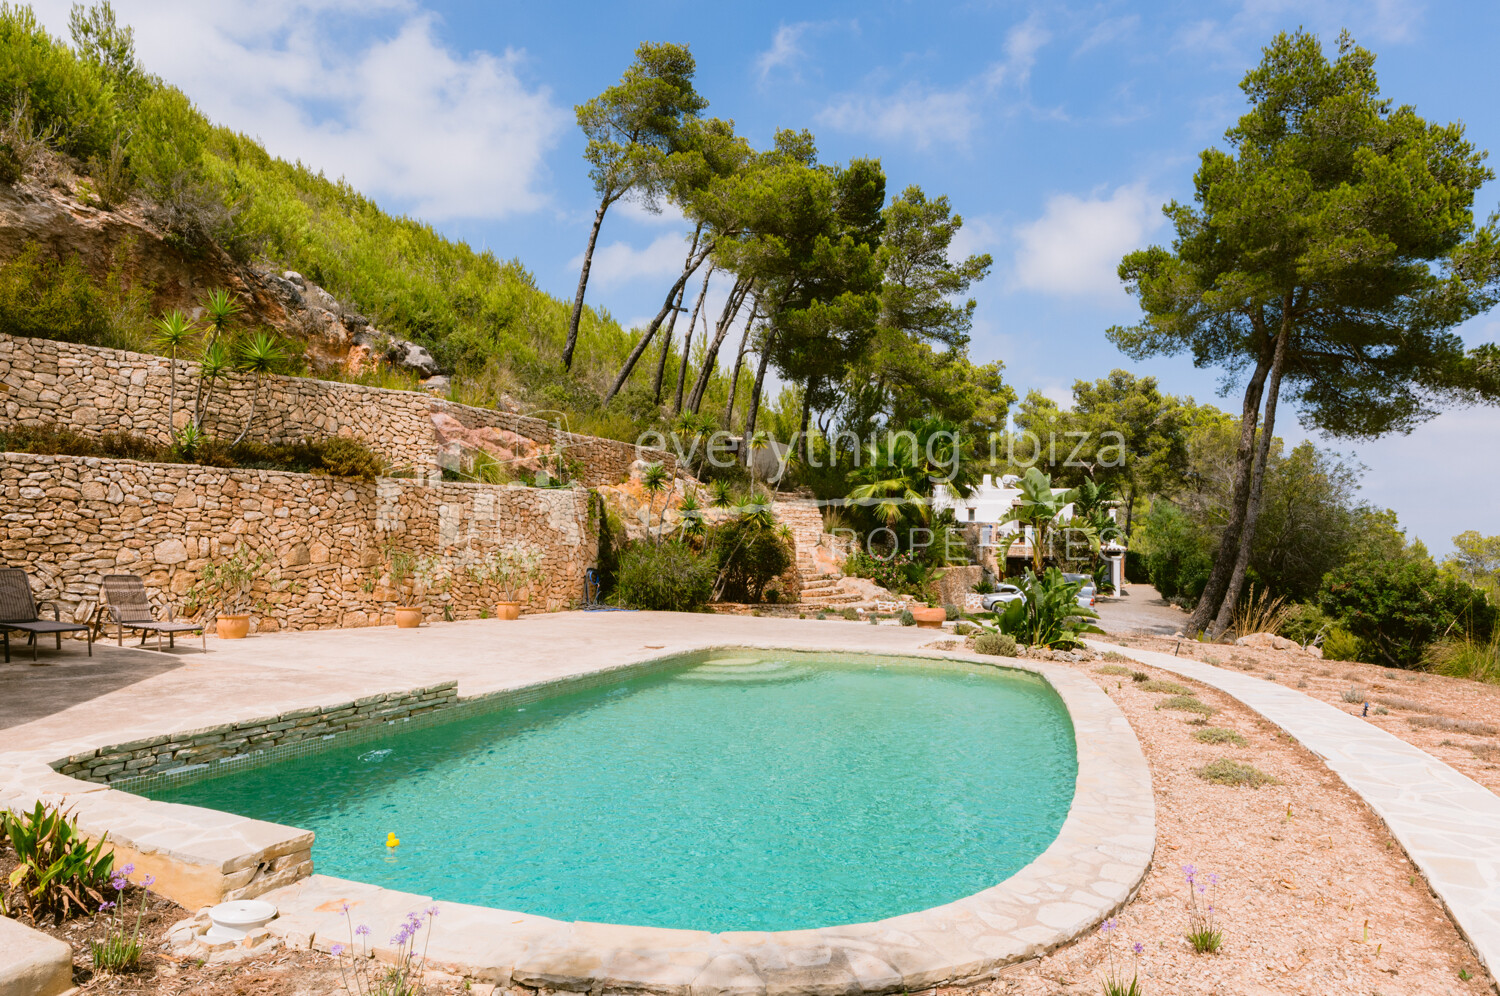 Traditional Finca with Pool and Large Private Plot Close to Stunning North Eastern Beaches, ref.1671, for sale in Ibiza by everything ibiza Properties